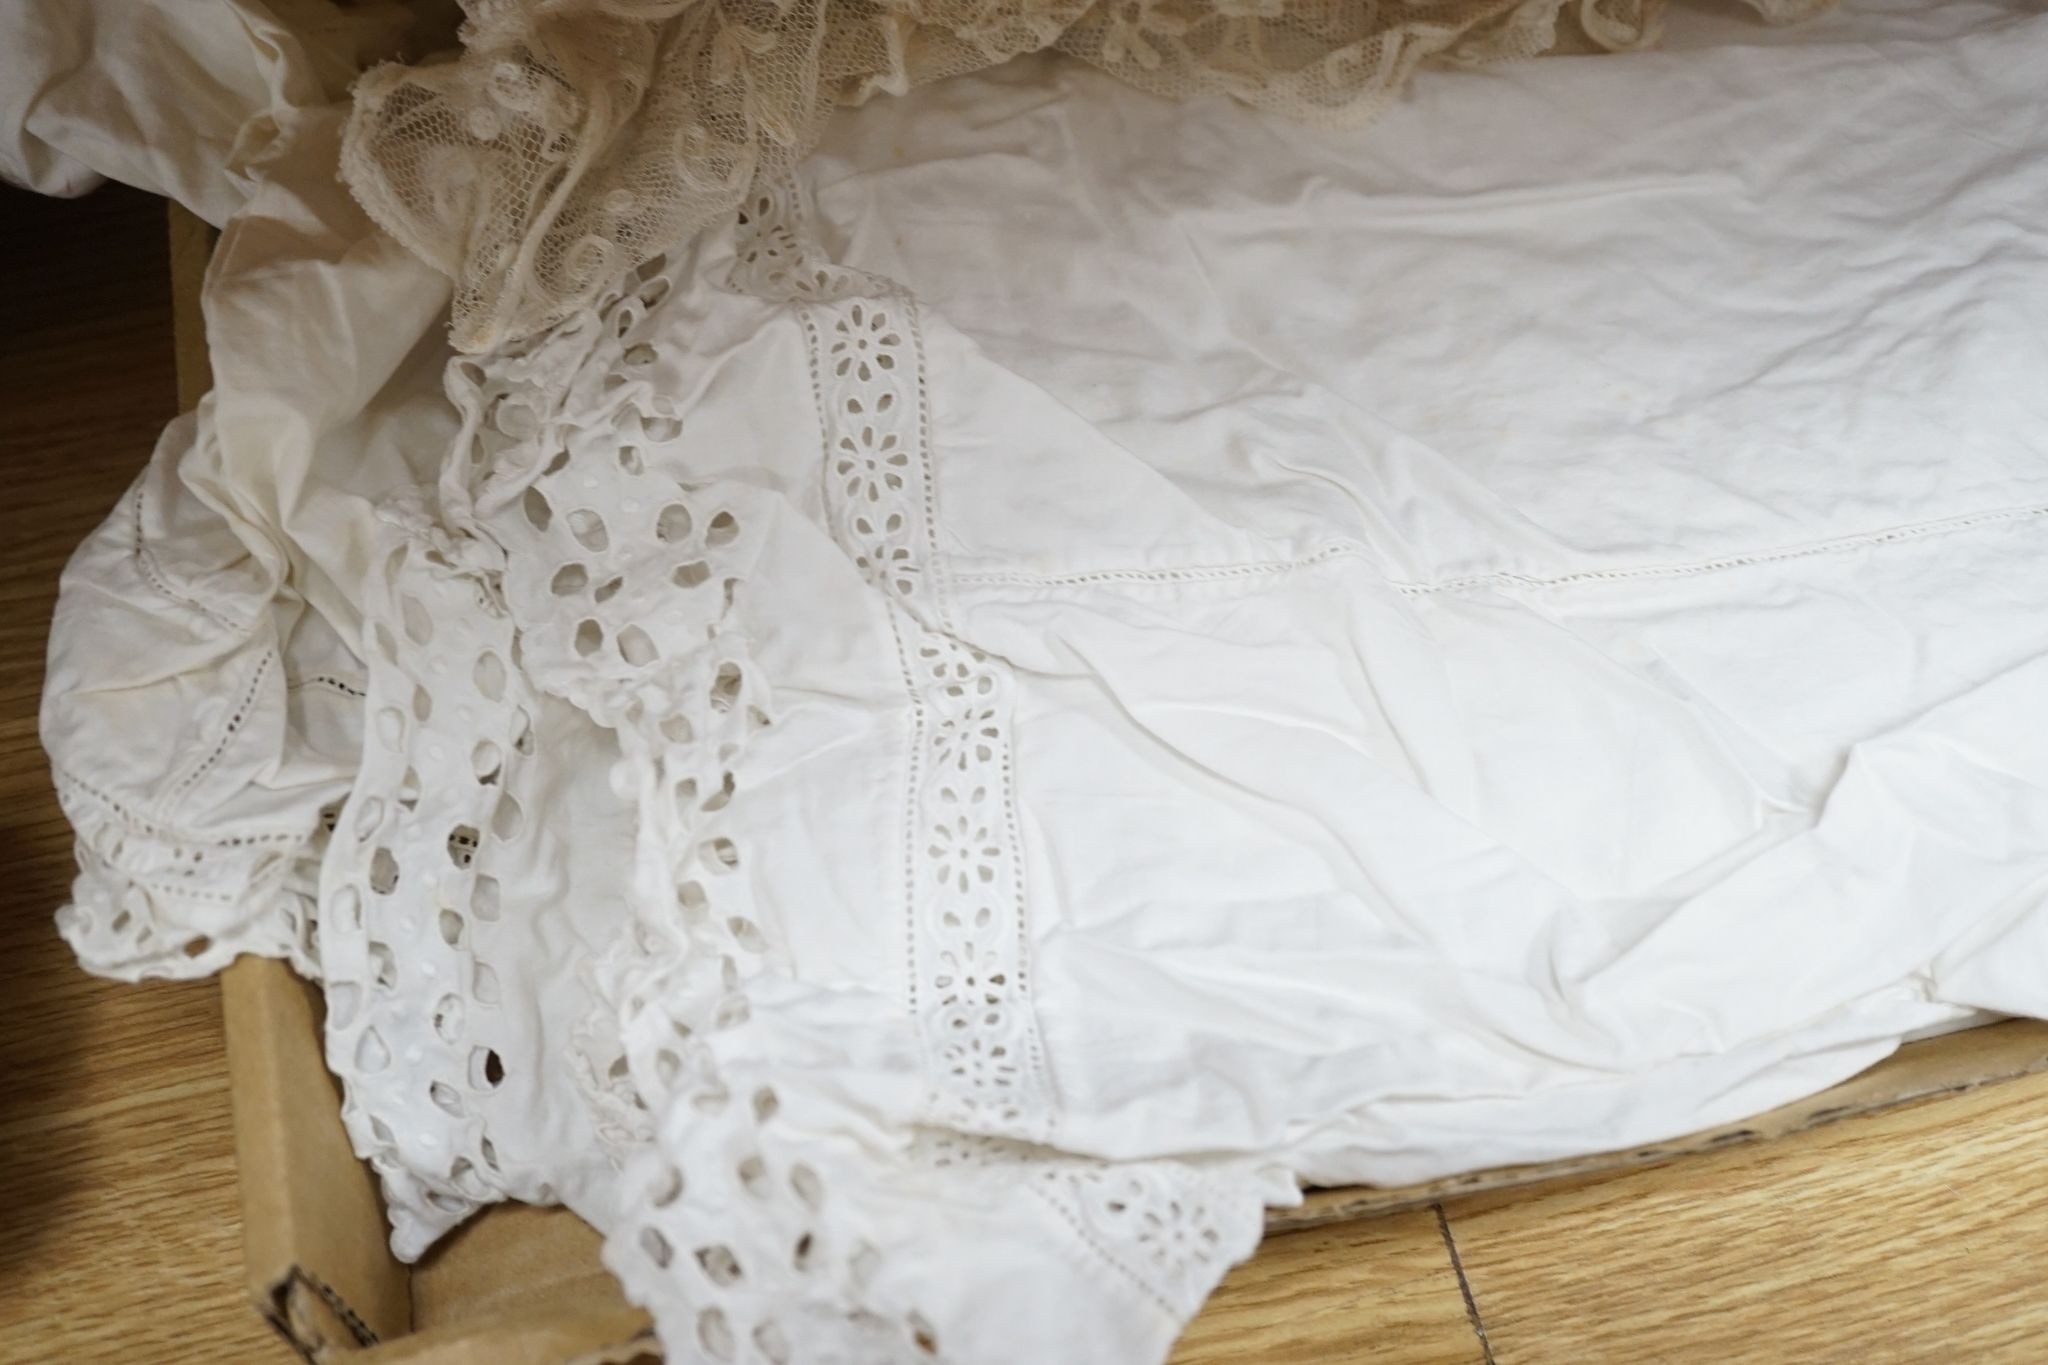 Three Edwardian lace blouses, a lace collar and all-in-one under garments